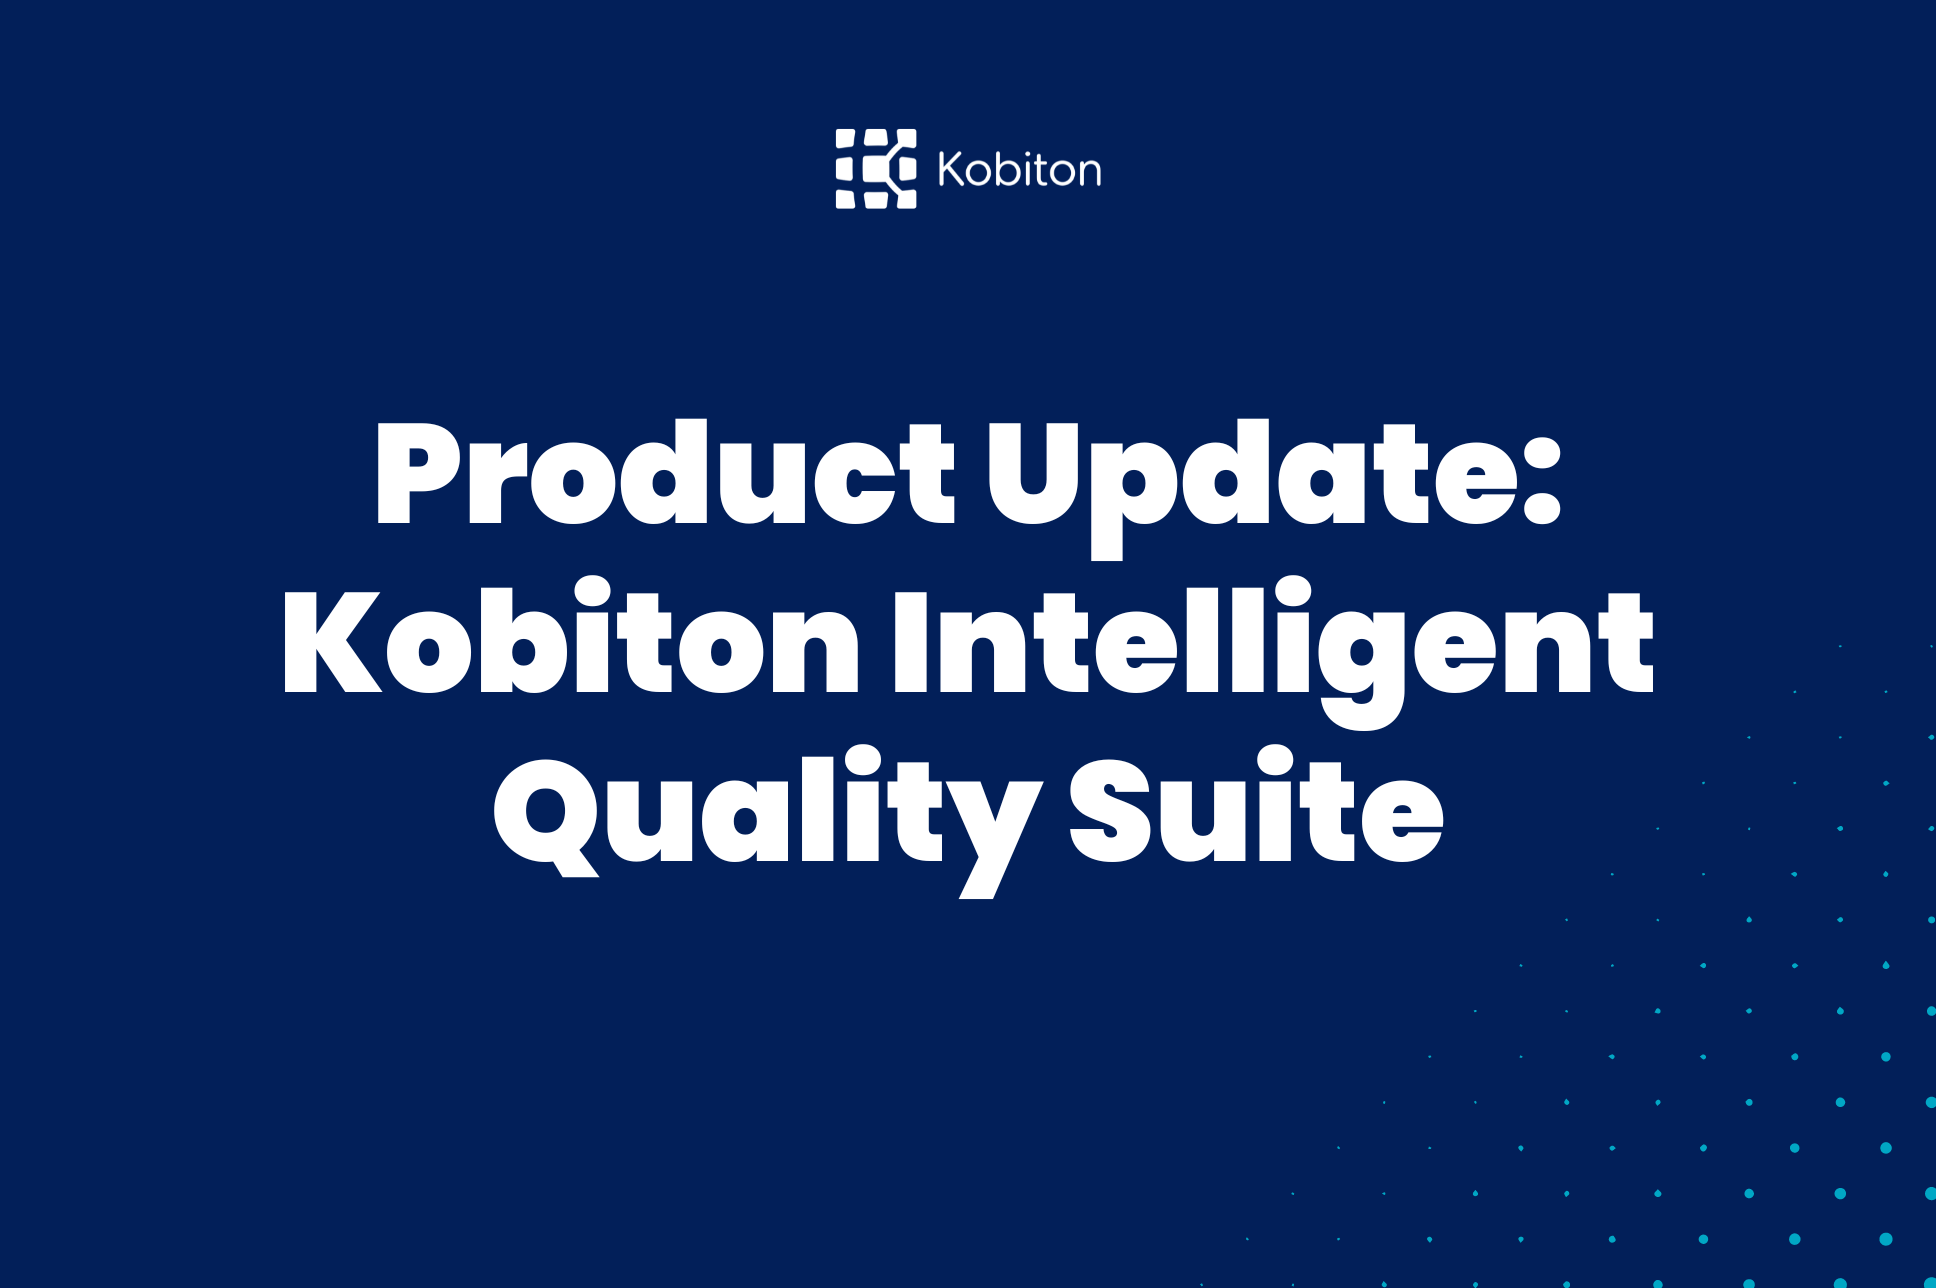 Product update: Kobiton Intelligent Quality Suite